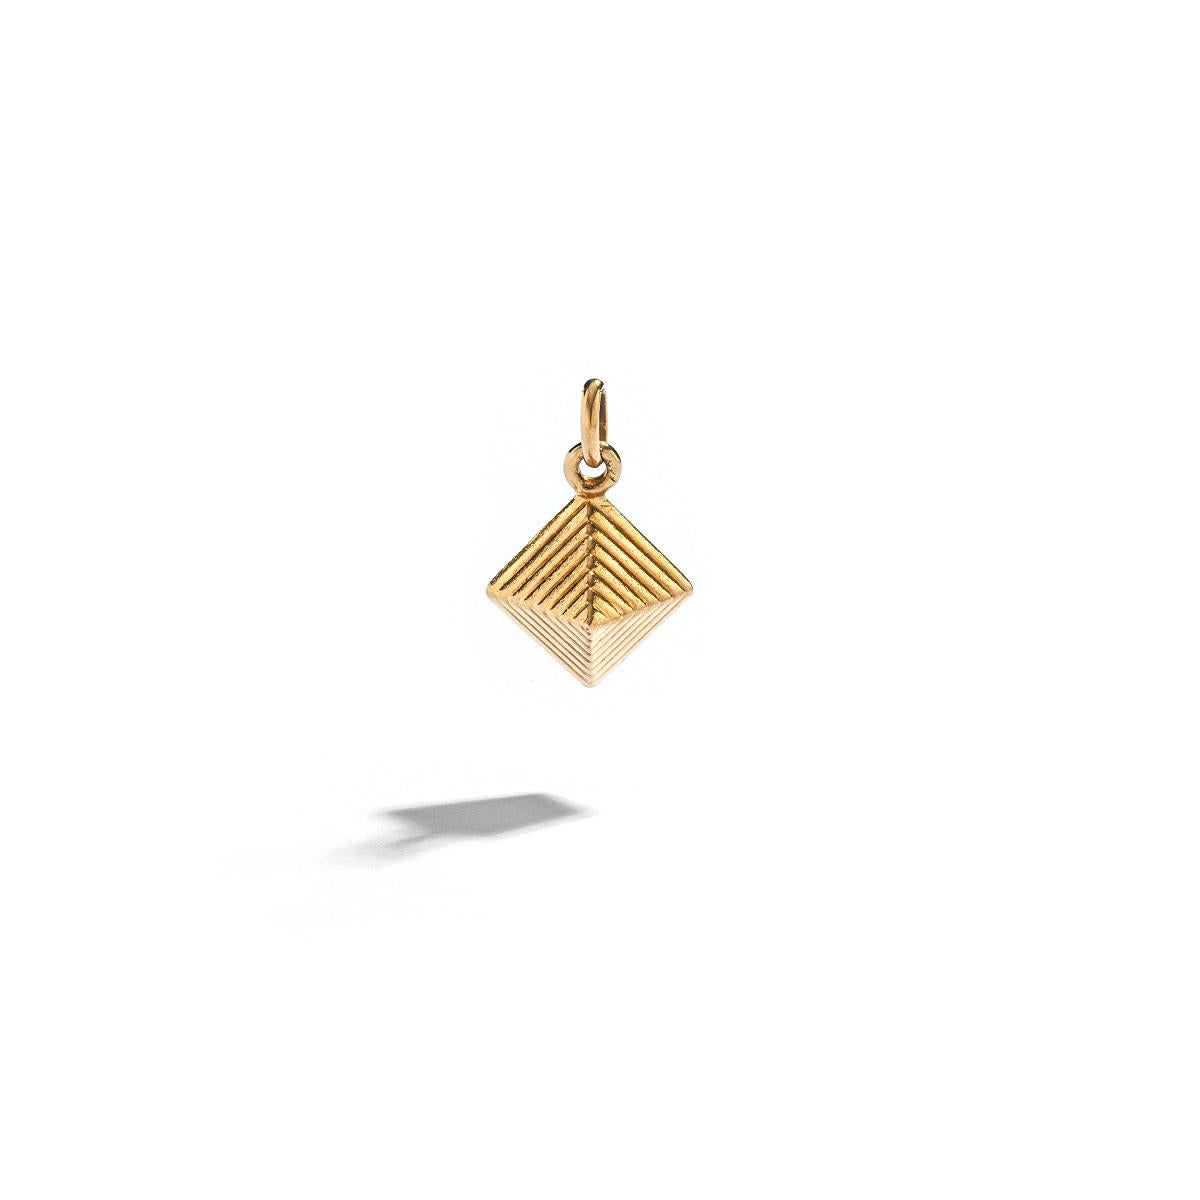 Pyramid Yellow Gold 18k Charm.
Egyptian Revival.

Total height: 0.79 inch (2.00 centimeters) including bail.
Total weight: 5.22 grams.